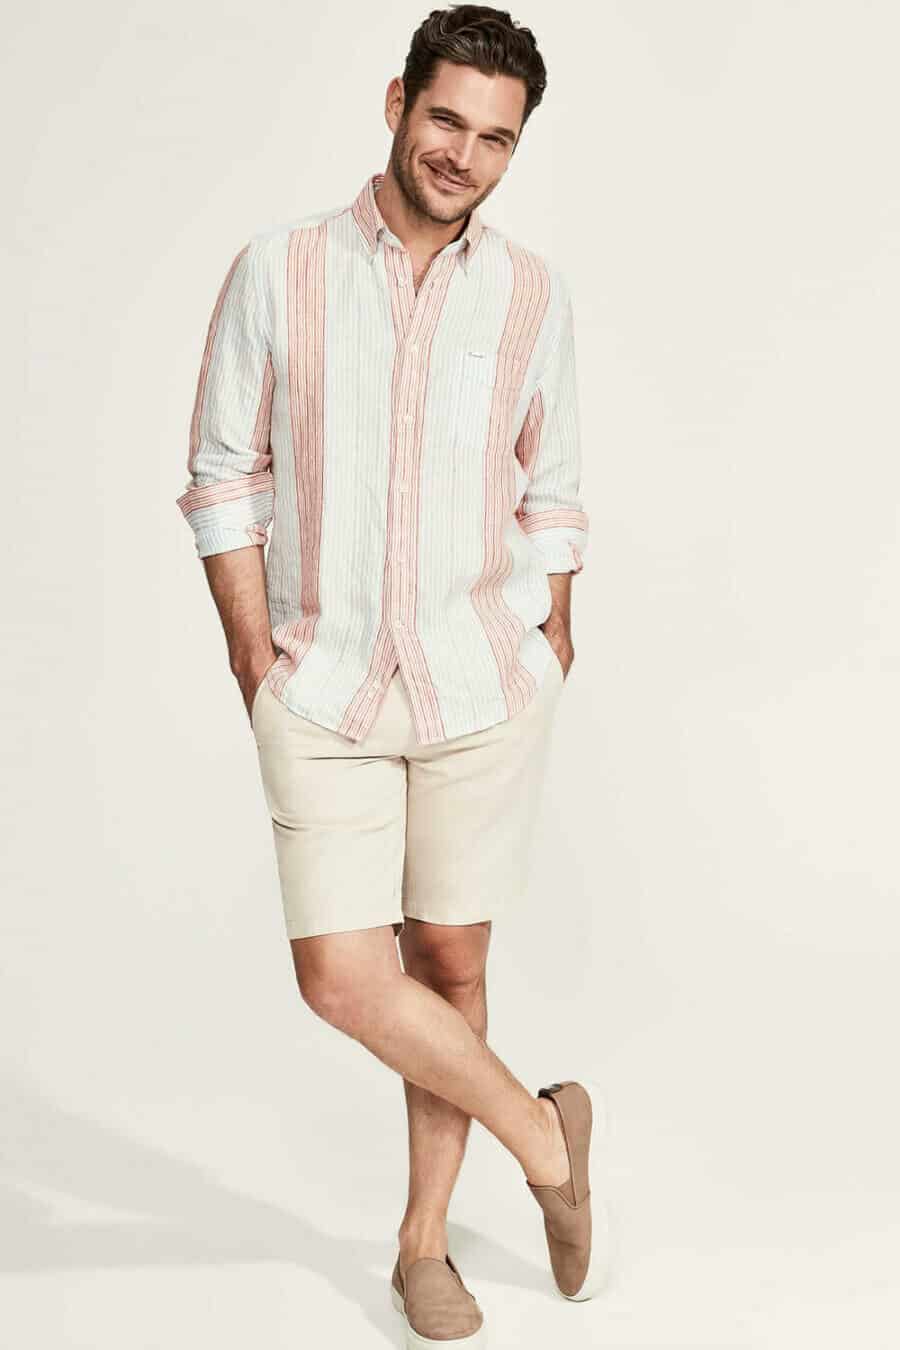 Men's summer shorts and striped shirt outfit